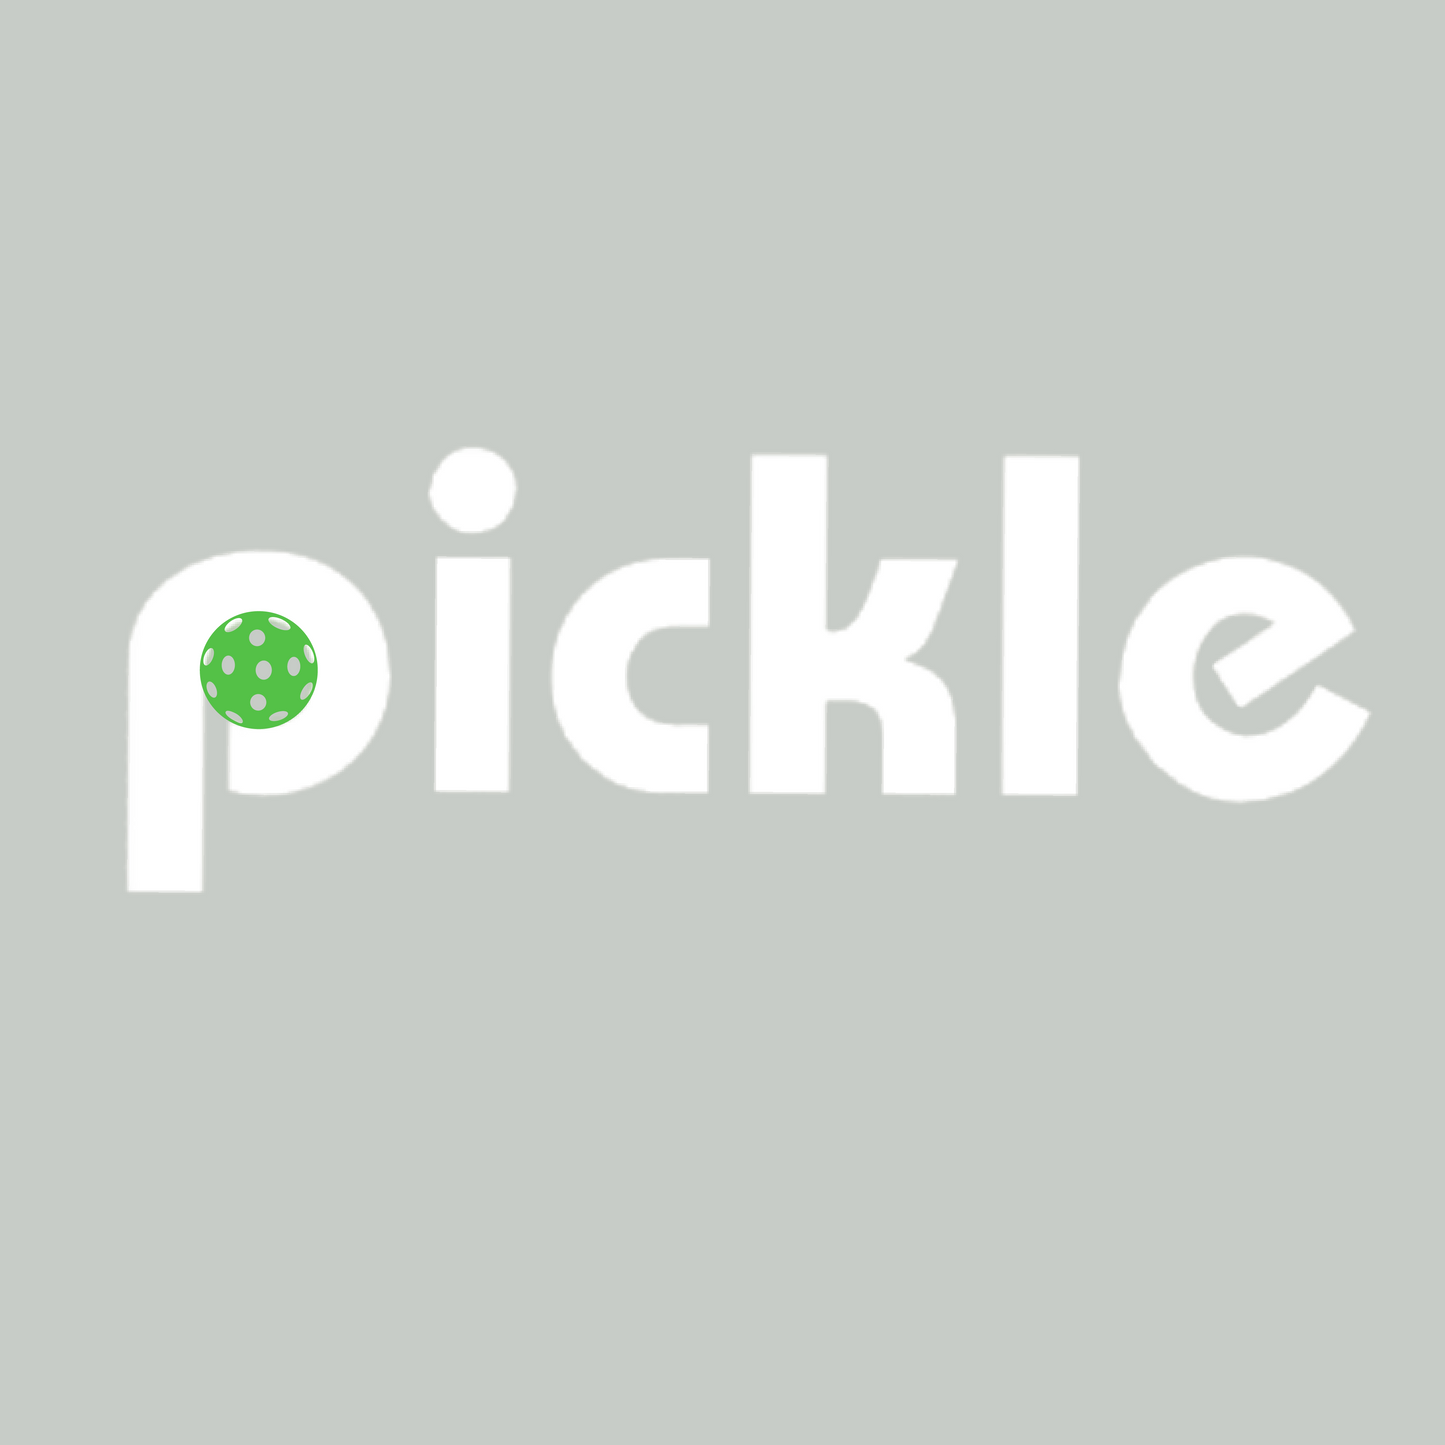 Pickle | Pickleball Court Towels | Grommeted 100% Cotton Terry Velour